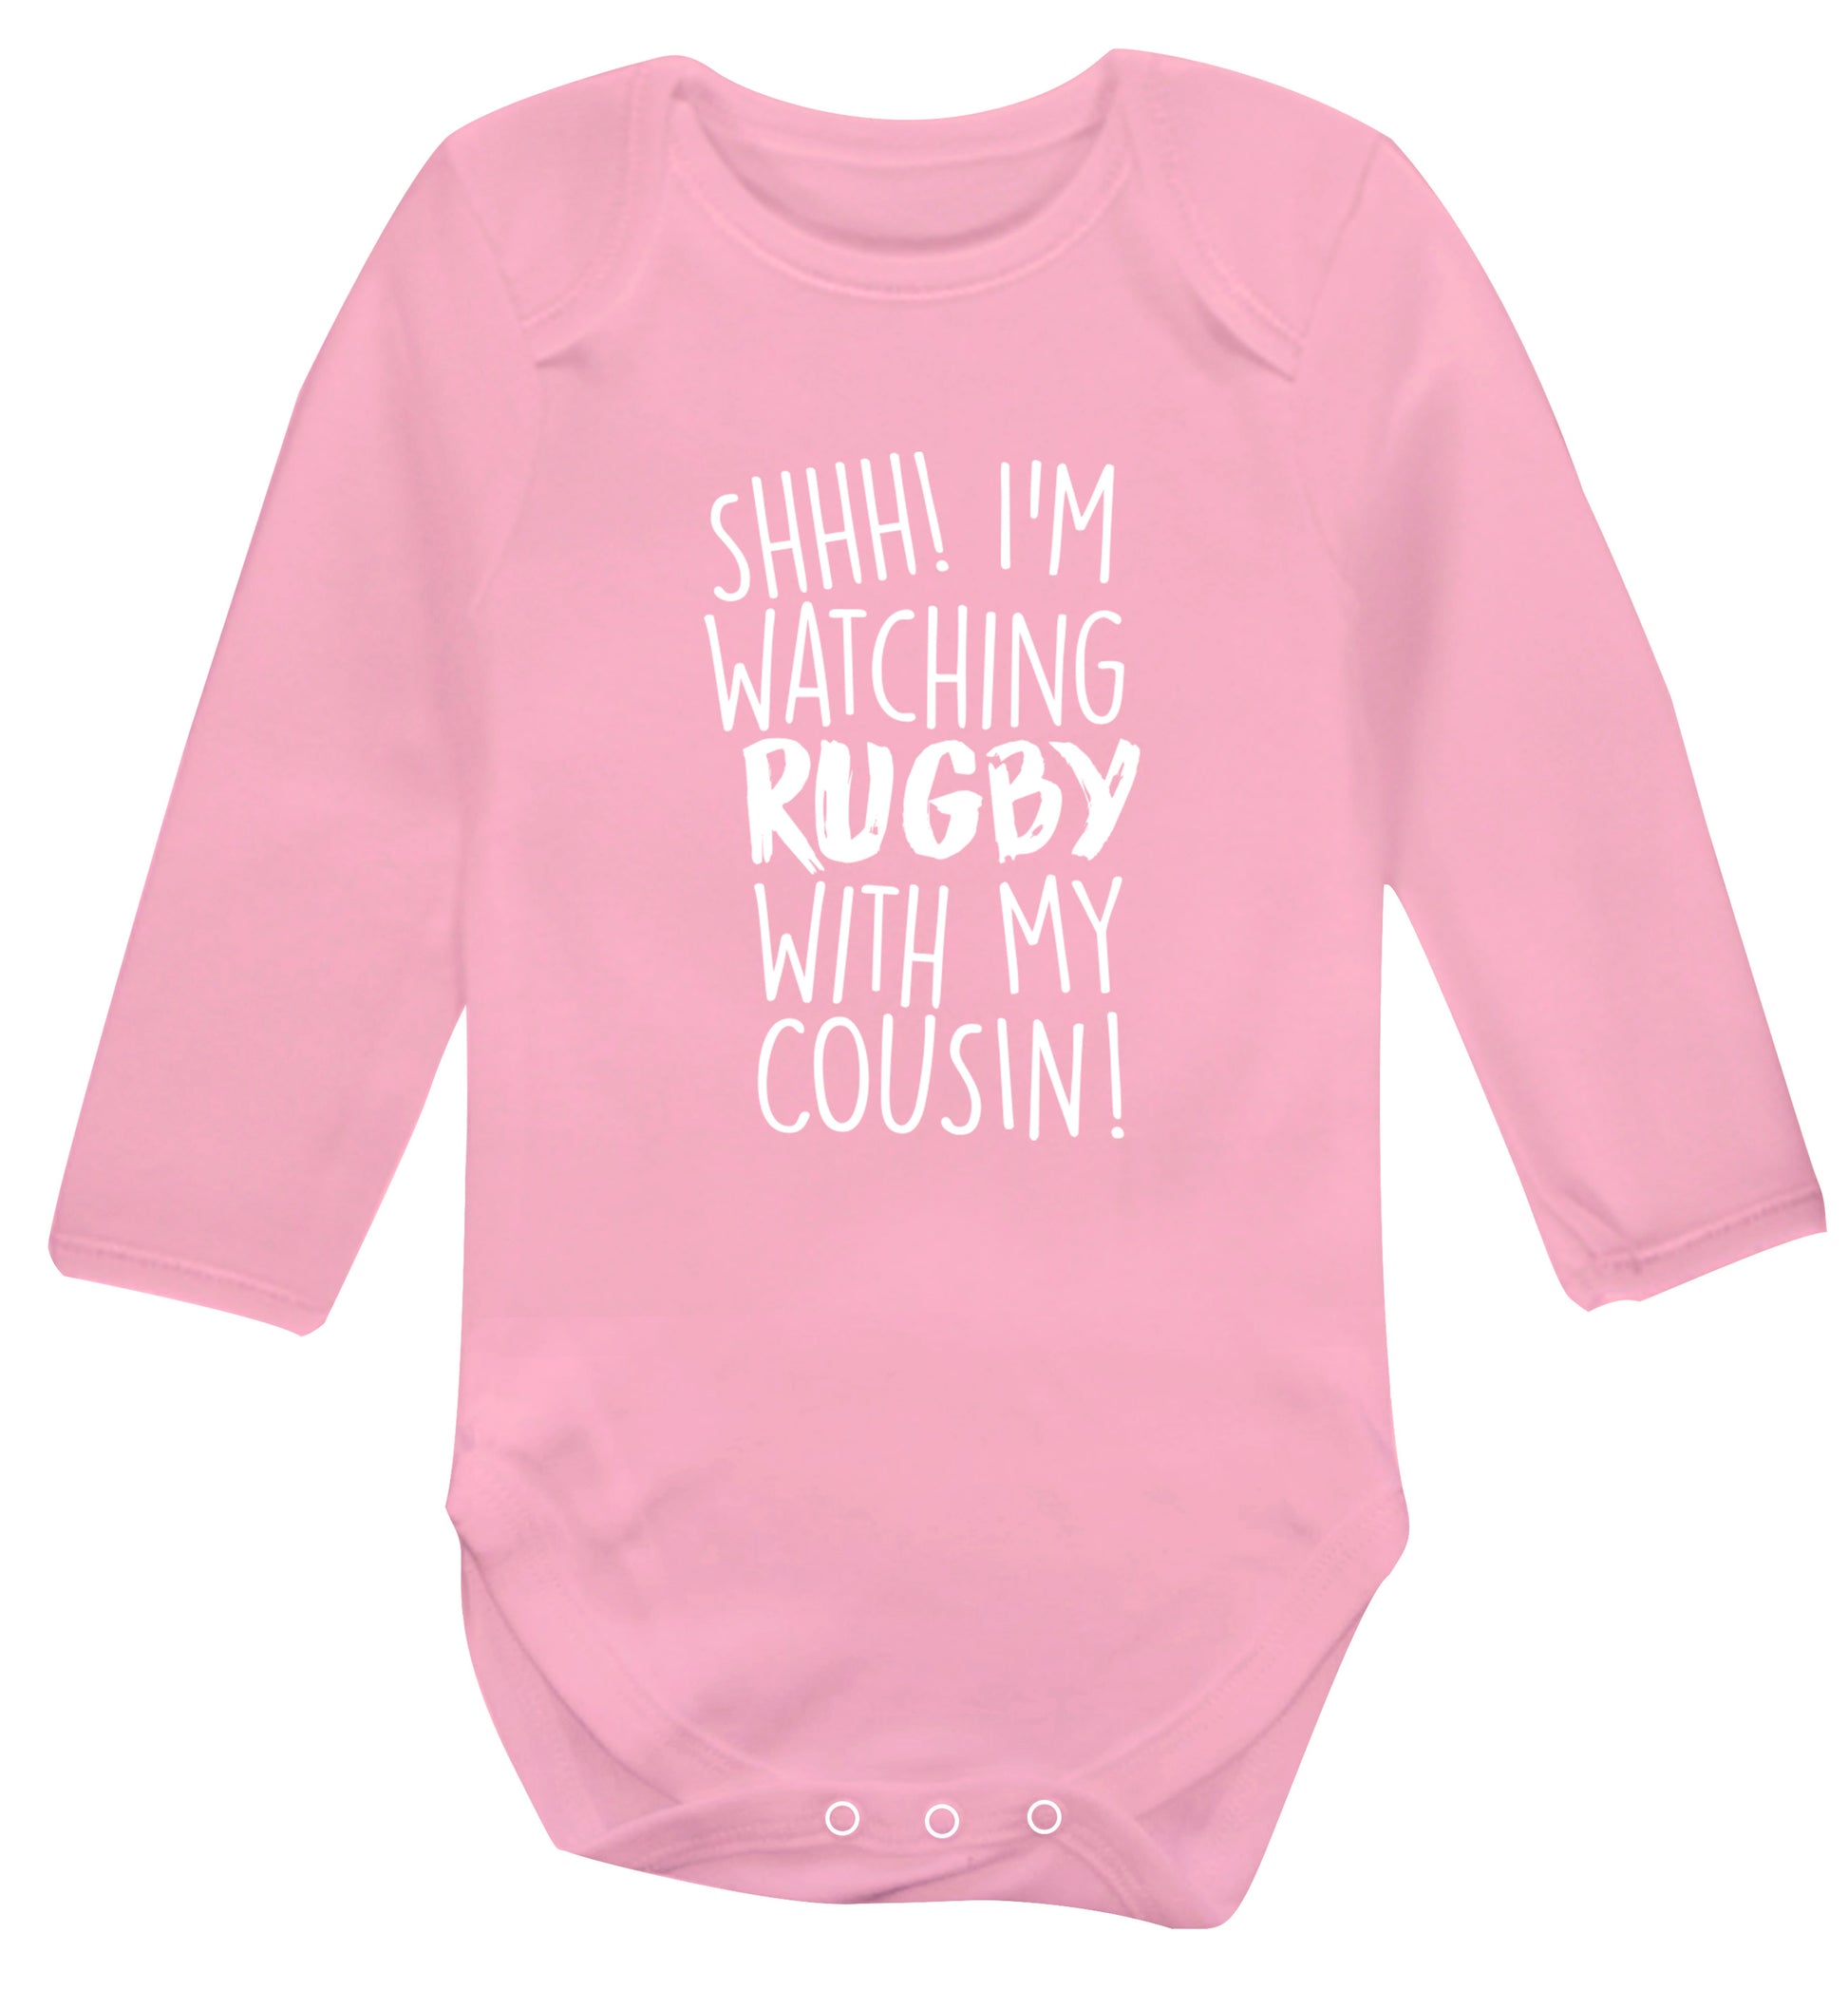 Shhh I'm watching rugby with my cousin Baby Vest long sleeved pale pink 6-12 months